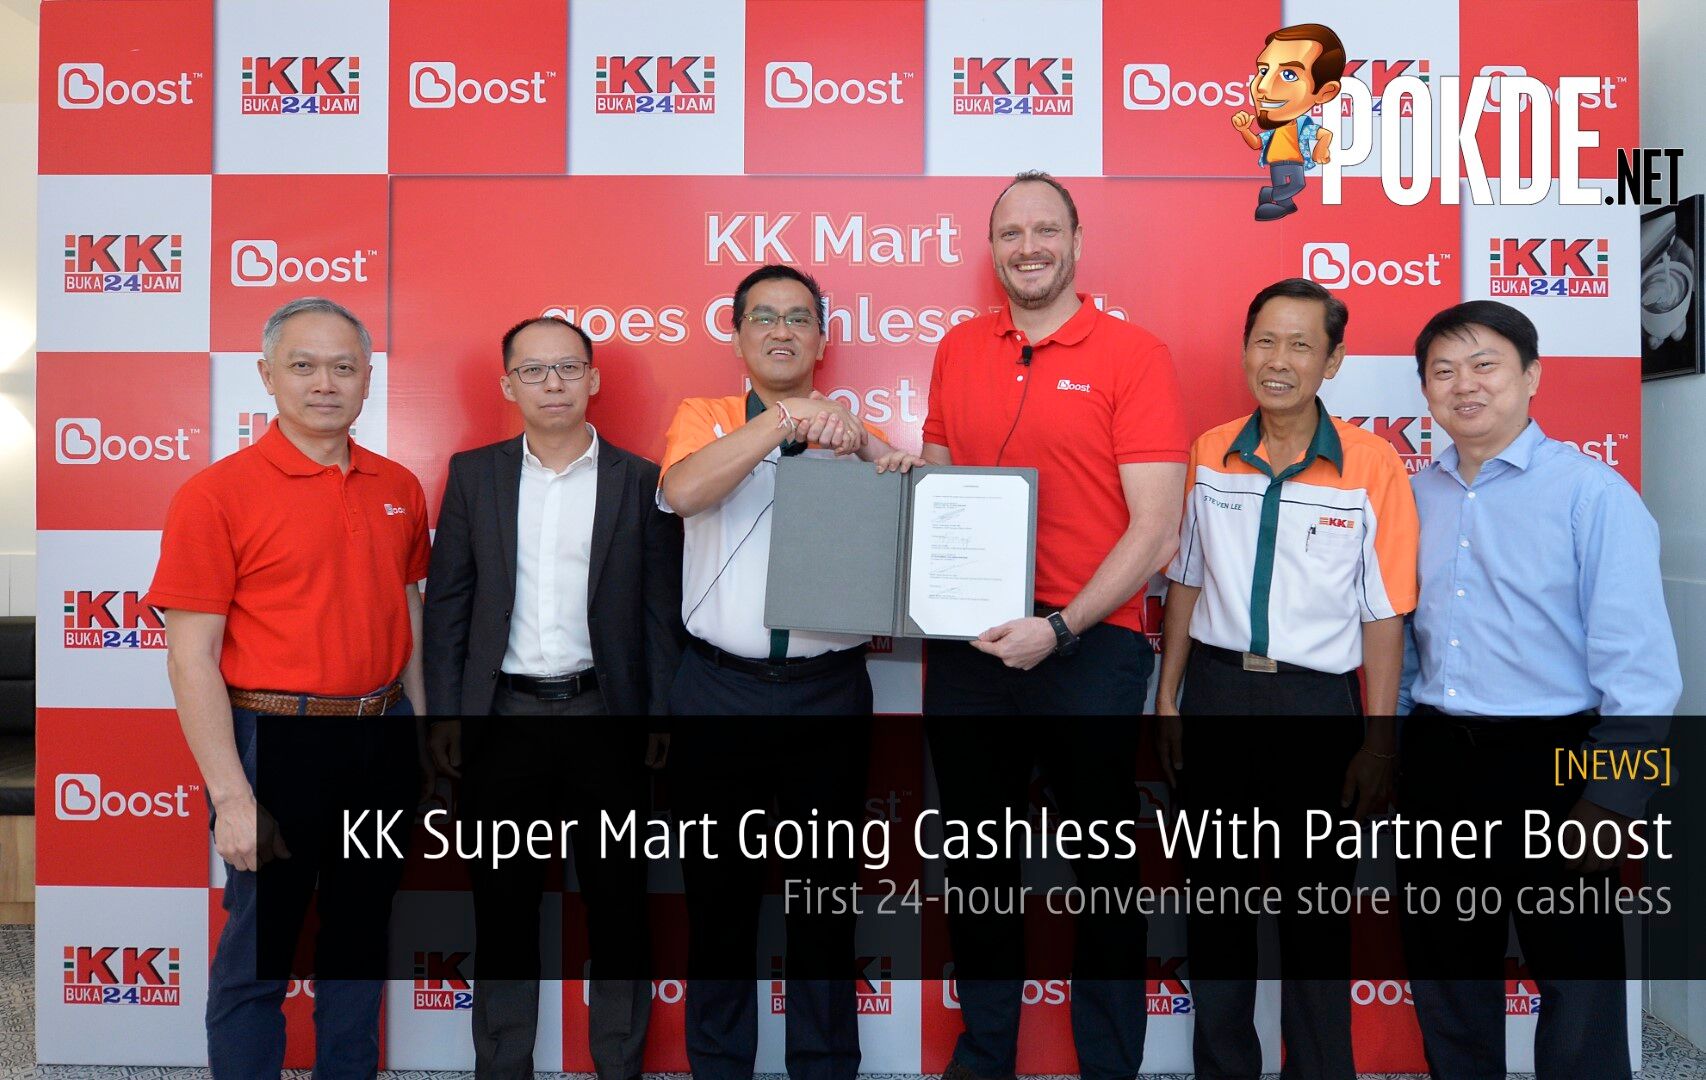 KK Super Mart Going Cashless With Partner Boost- First 24-hour convenience store to go cashless 32